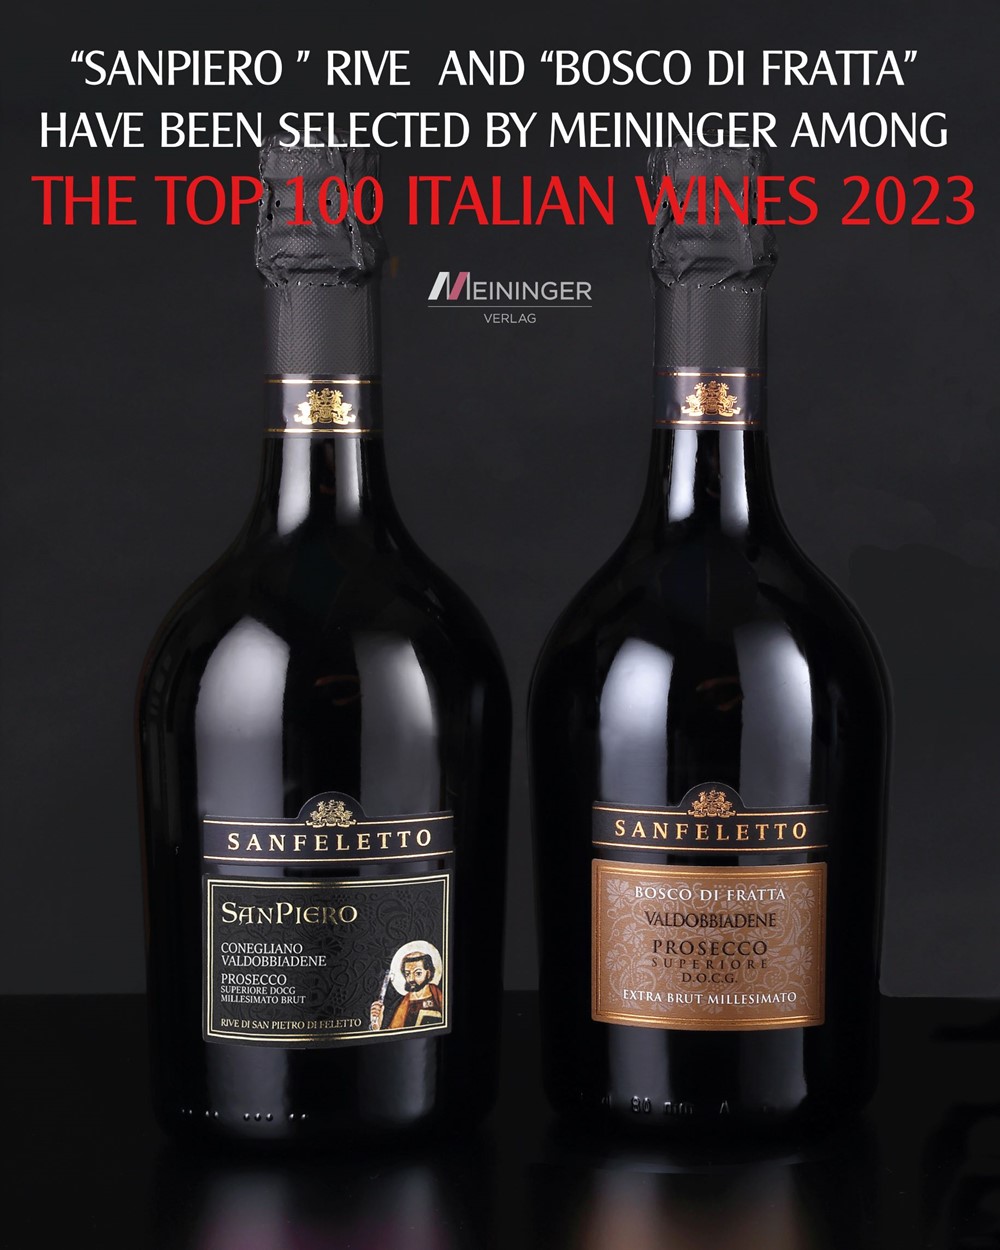 THE TOP 100 ITALIAN WINES 2023 BY MEININGER